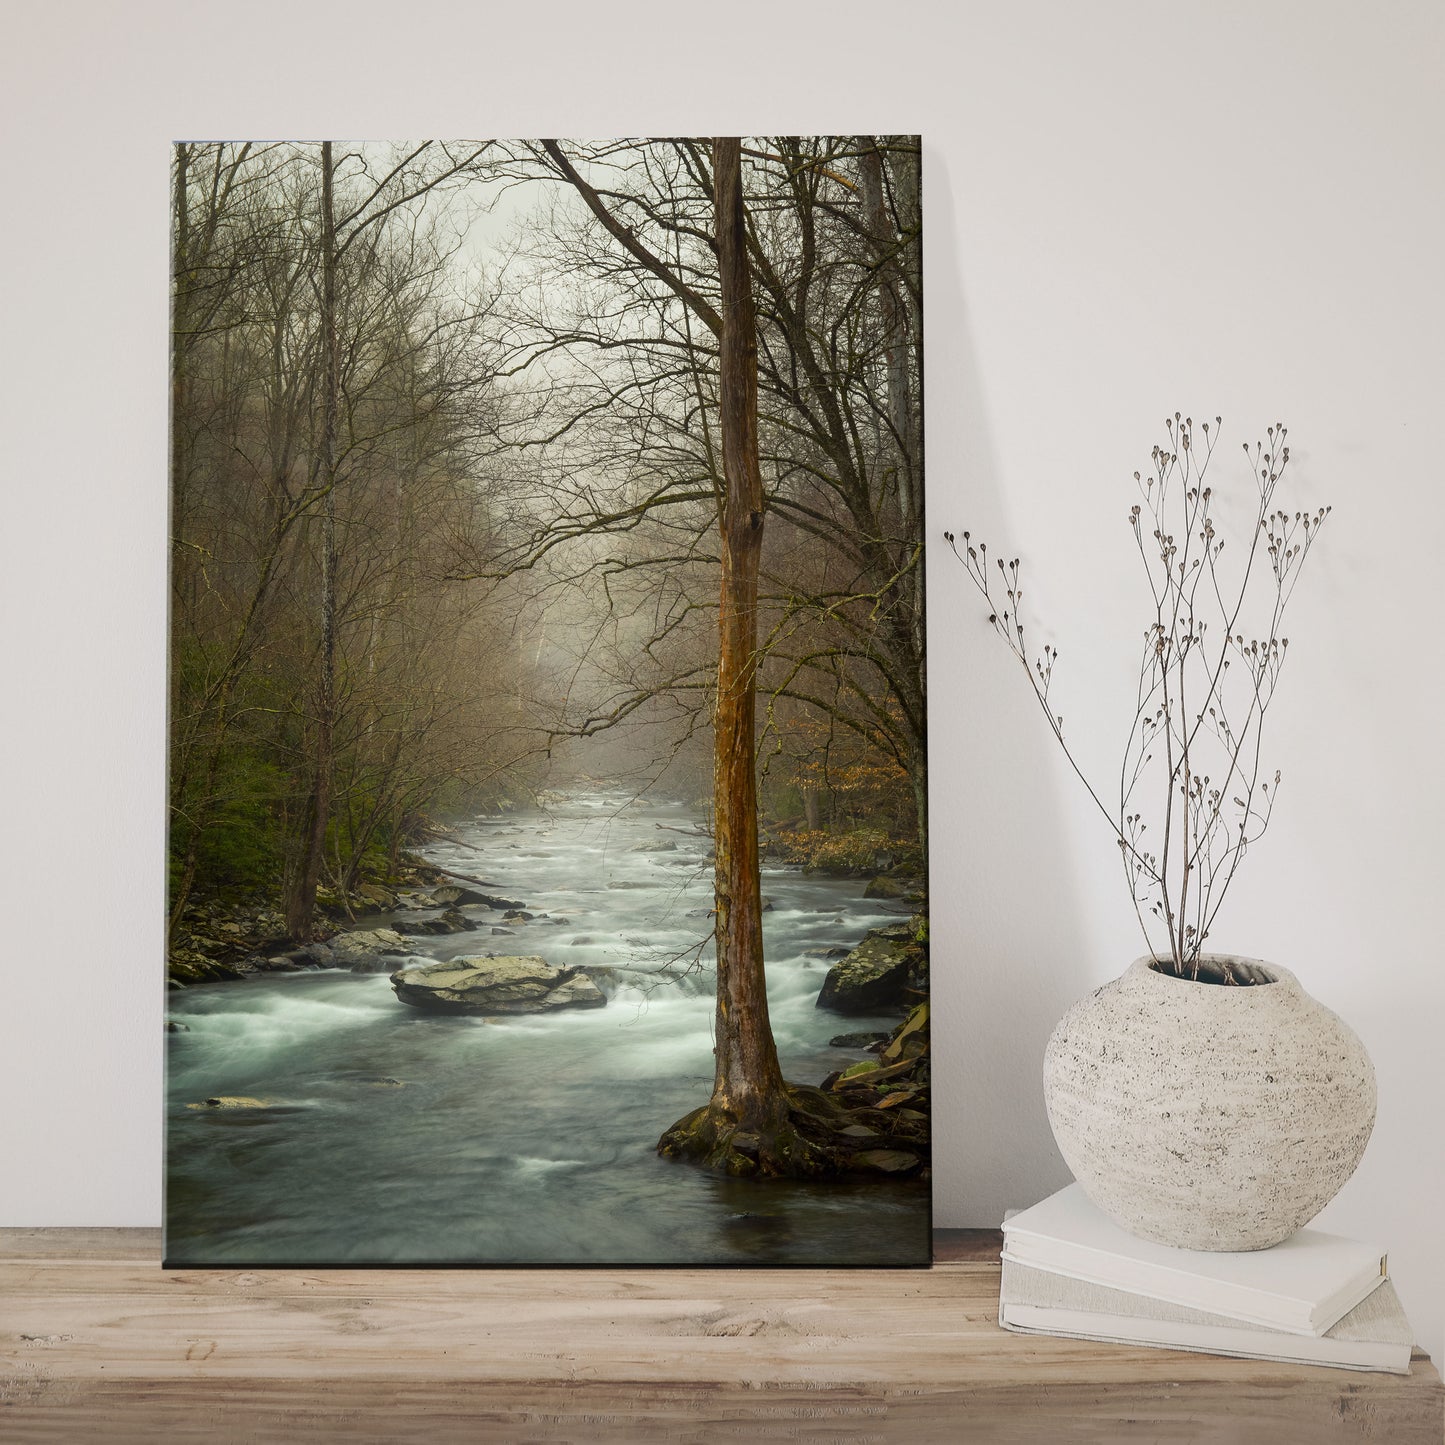 High-quality photography print on canvas capturing the serene beauty of the Smoky Mountains’ forests and streams, ideal for home or office decor.